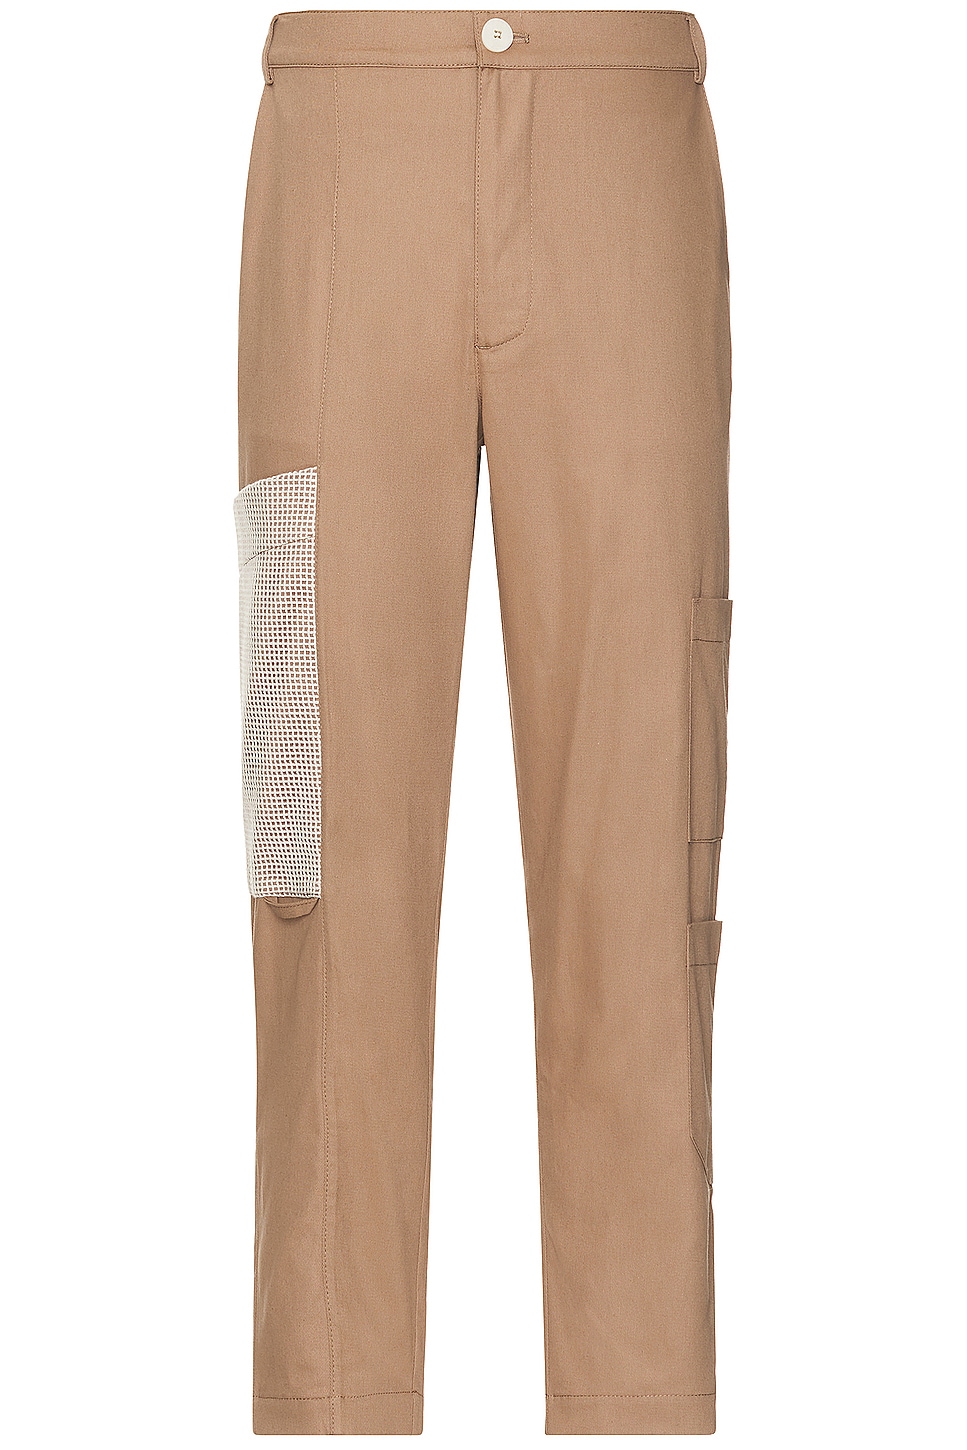 Image 1 of SIEDRES Justin Cargo Pant in Brown